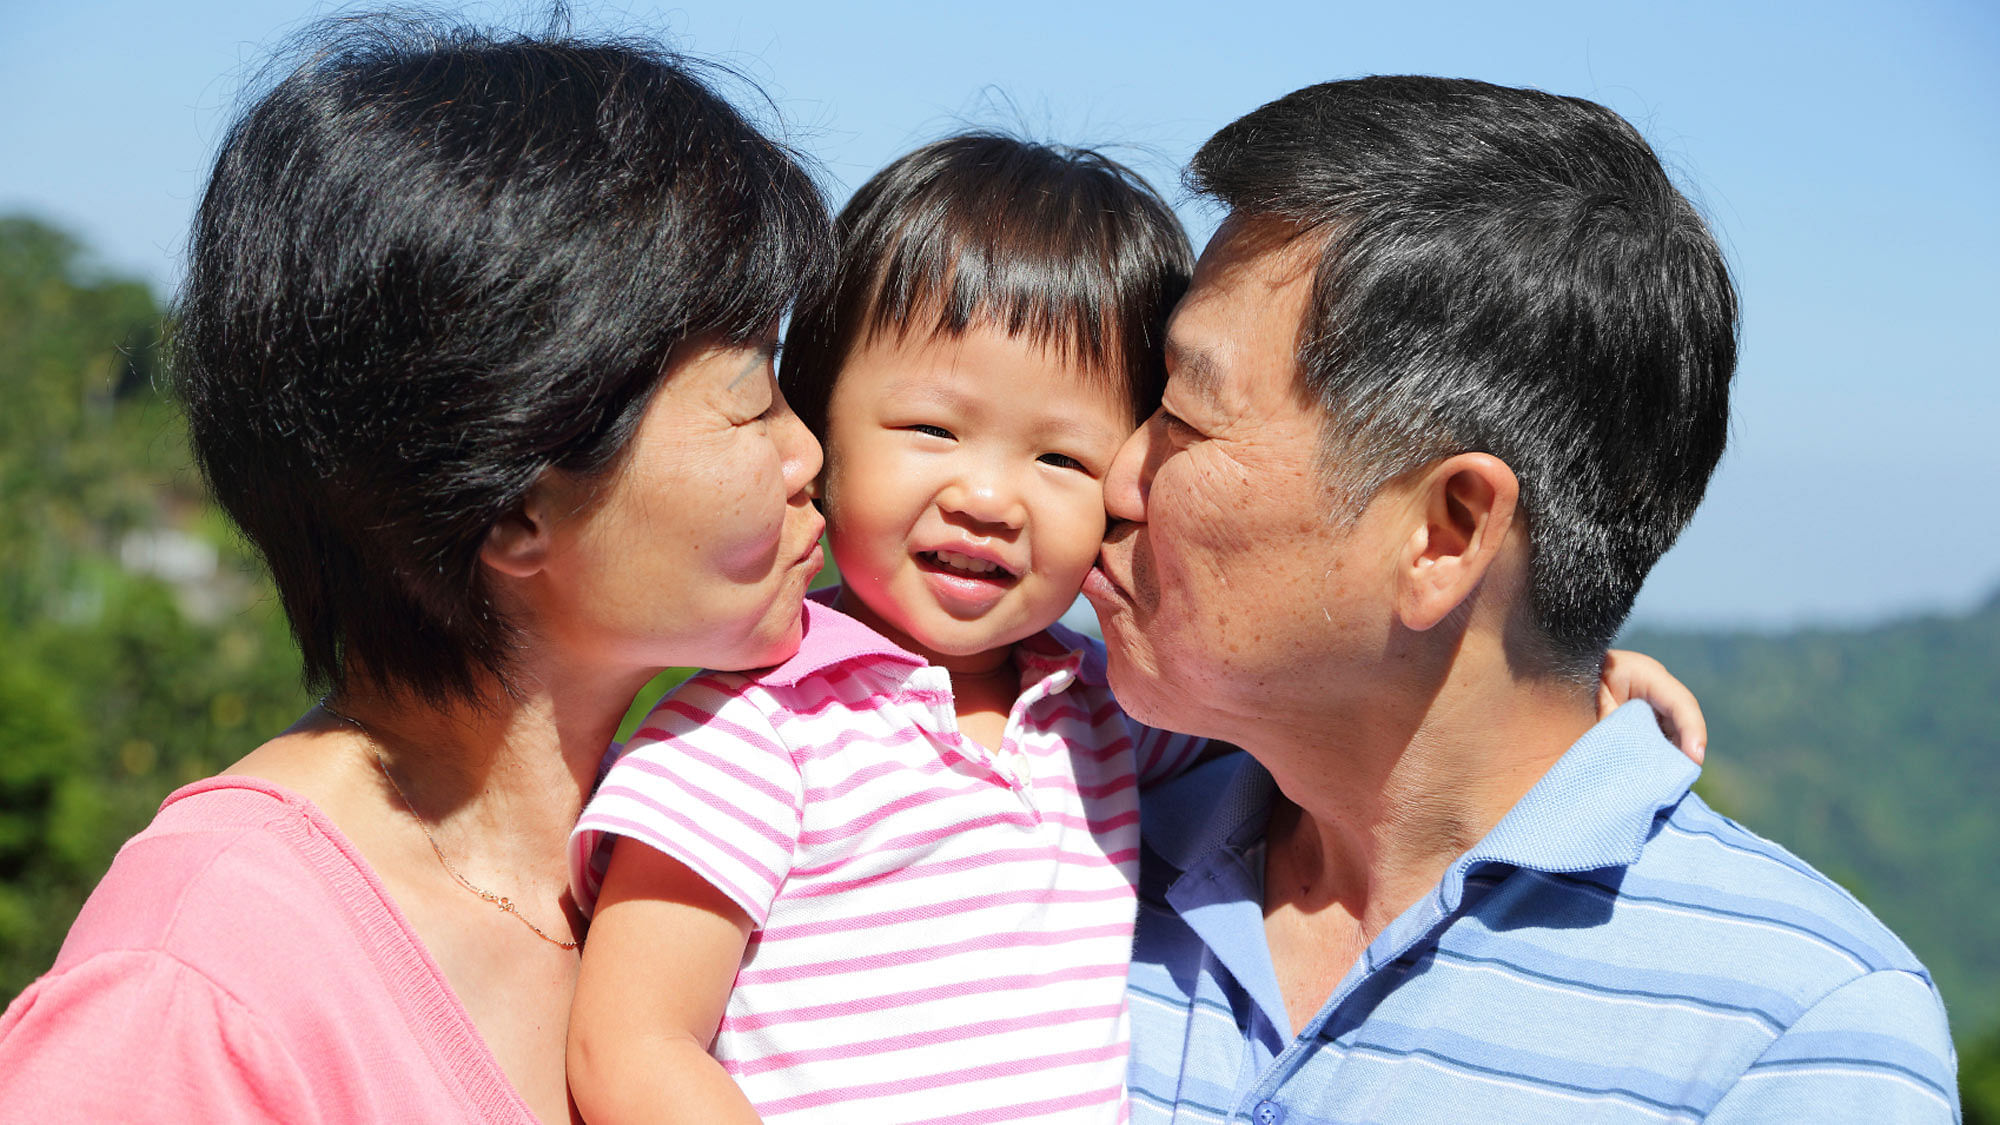 China has abolished its one-child policy to combat a growing ageing population. (Photo: iStockPhoto)